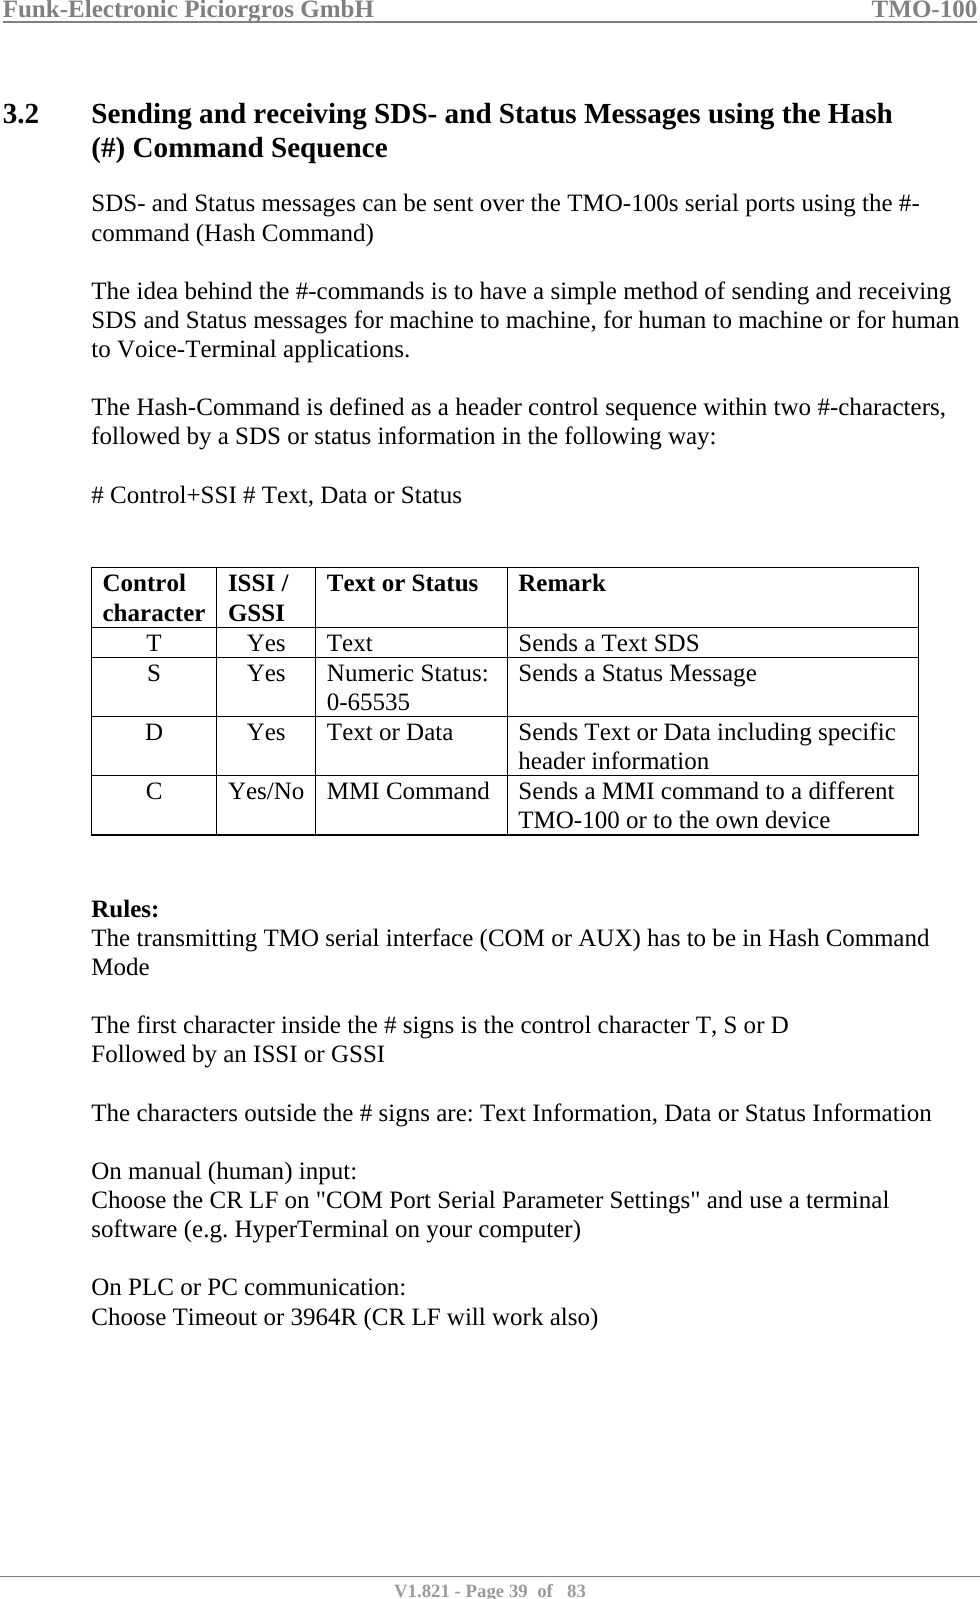 Funk-Electronic Piciorgros GmbH   TMO-100   V1.821 - Page 39  of   83   3.2 Sending and receiving SDS- and Status Messages using the Hash (#) Command Sequence SDS- and Status messages can be sent over the TMO-100s serial ports using the #-command (Hash Command)  The idea behind the #-commands is to have a simple method of sending and receiving SDS and Status messages for machine to machine, for human to machine or for human to Voice-Terminal applications.  The Hash-Command is defined as a header control sequence within two #-characters, followed by a SDS or status information in the following way:  # Control+SSI # Text, Data or Status   Control  character  ISSI / GSSI  Text or Status  Remark T  Yes  Text  Sends a Text SDS S Yes Numeric Status: 0-65535  Sends a Status Message D  Yes  Text or Data  Sends Text or Data including specific header information C  Yes/No  MMI Command  Sends a MMI command to a different TMO-100 or to the own device   Rules: The transmitting TMO serial interface (COM or AUX) has to be in Hash Command Mode  The first character inside the # signs is the control character T, S or D Followed by an ISSI or GSSI  The characters outside the # signs are: Text Information, Data or Status Information  On manual (human) input:  Choose the CR LF on &quot;COM Port Serial Parameter Settings&quot; and use a terminal software (e.g. HyperTerminal on your computer)  On PLC or PC communication:  Choose Timeout or 3964R (CR LF will work also)  